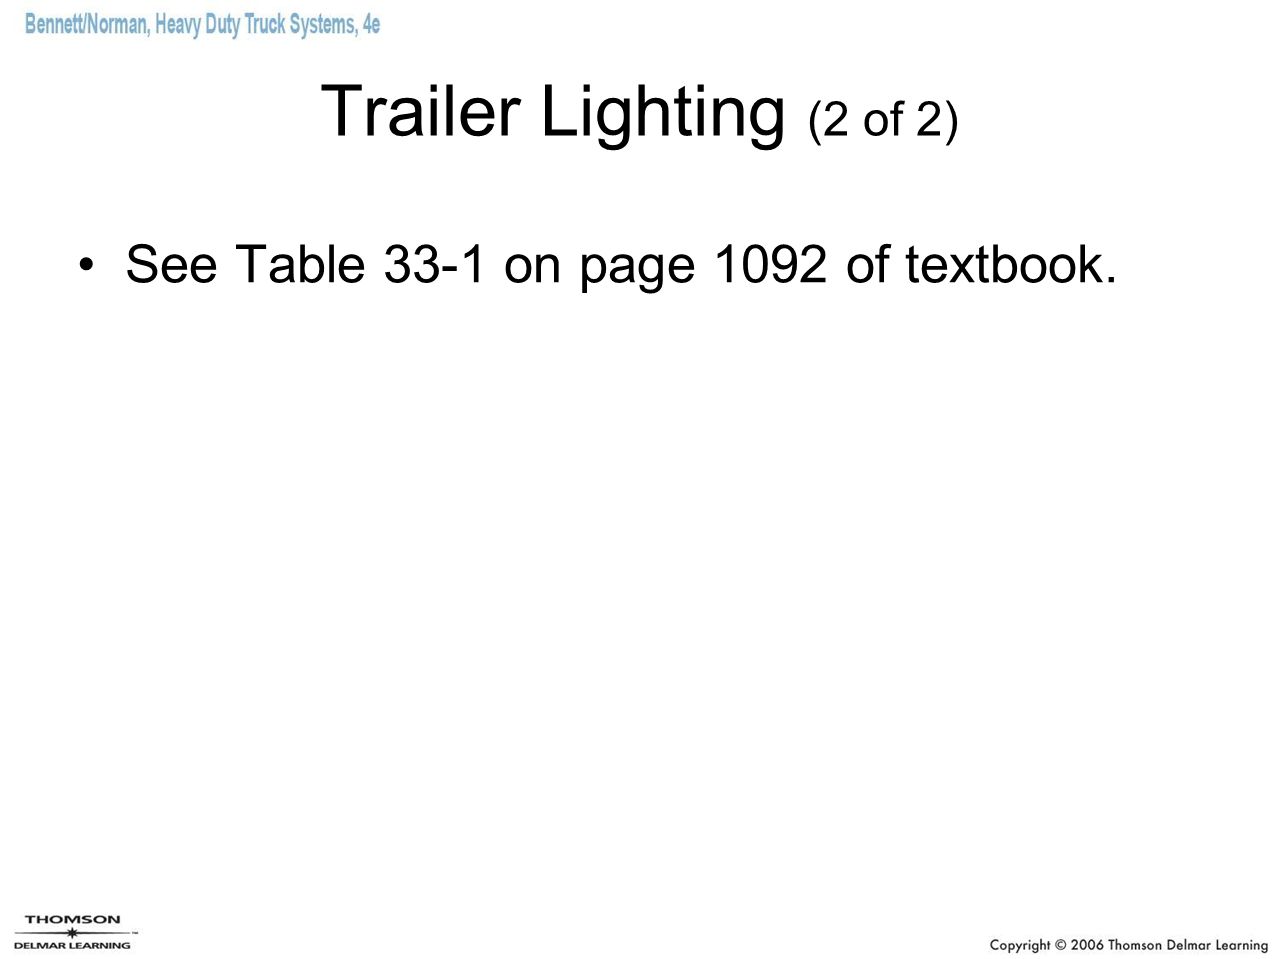 Trailer Lighting (2 of 2) See Table 33-1 on page 1092 of textbook.